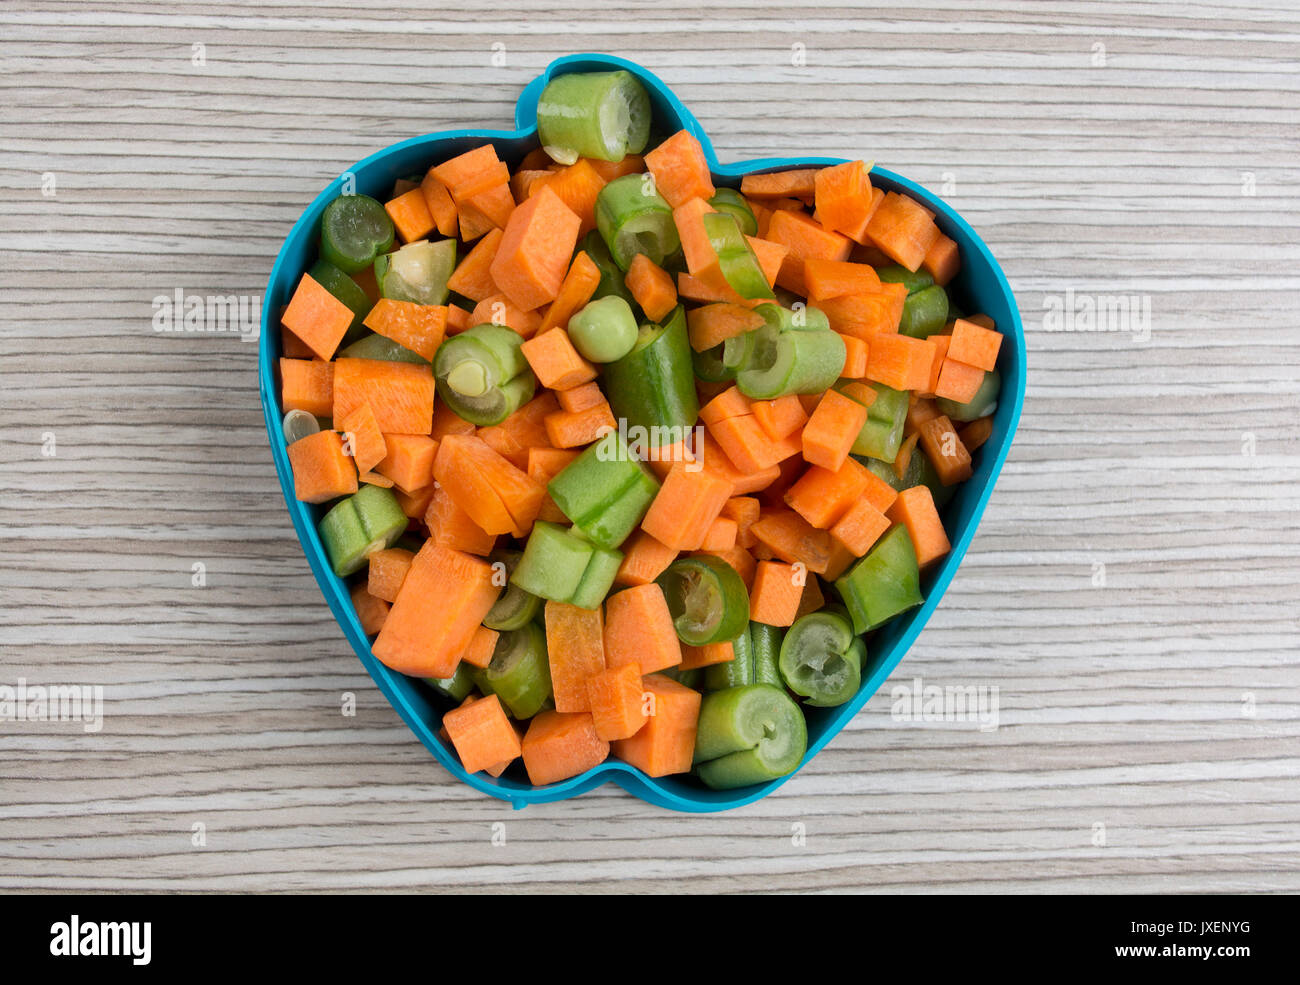 Apple shape by various vegetables on the table. Stock Photo